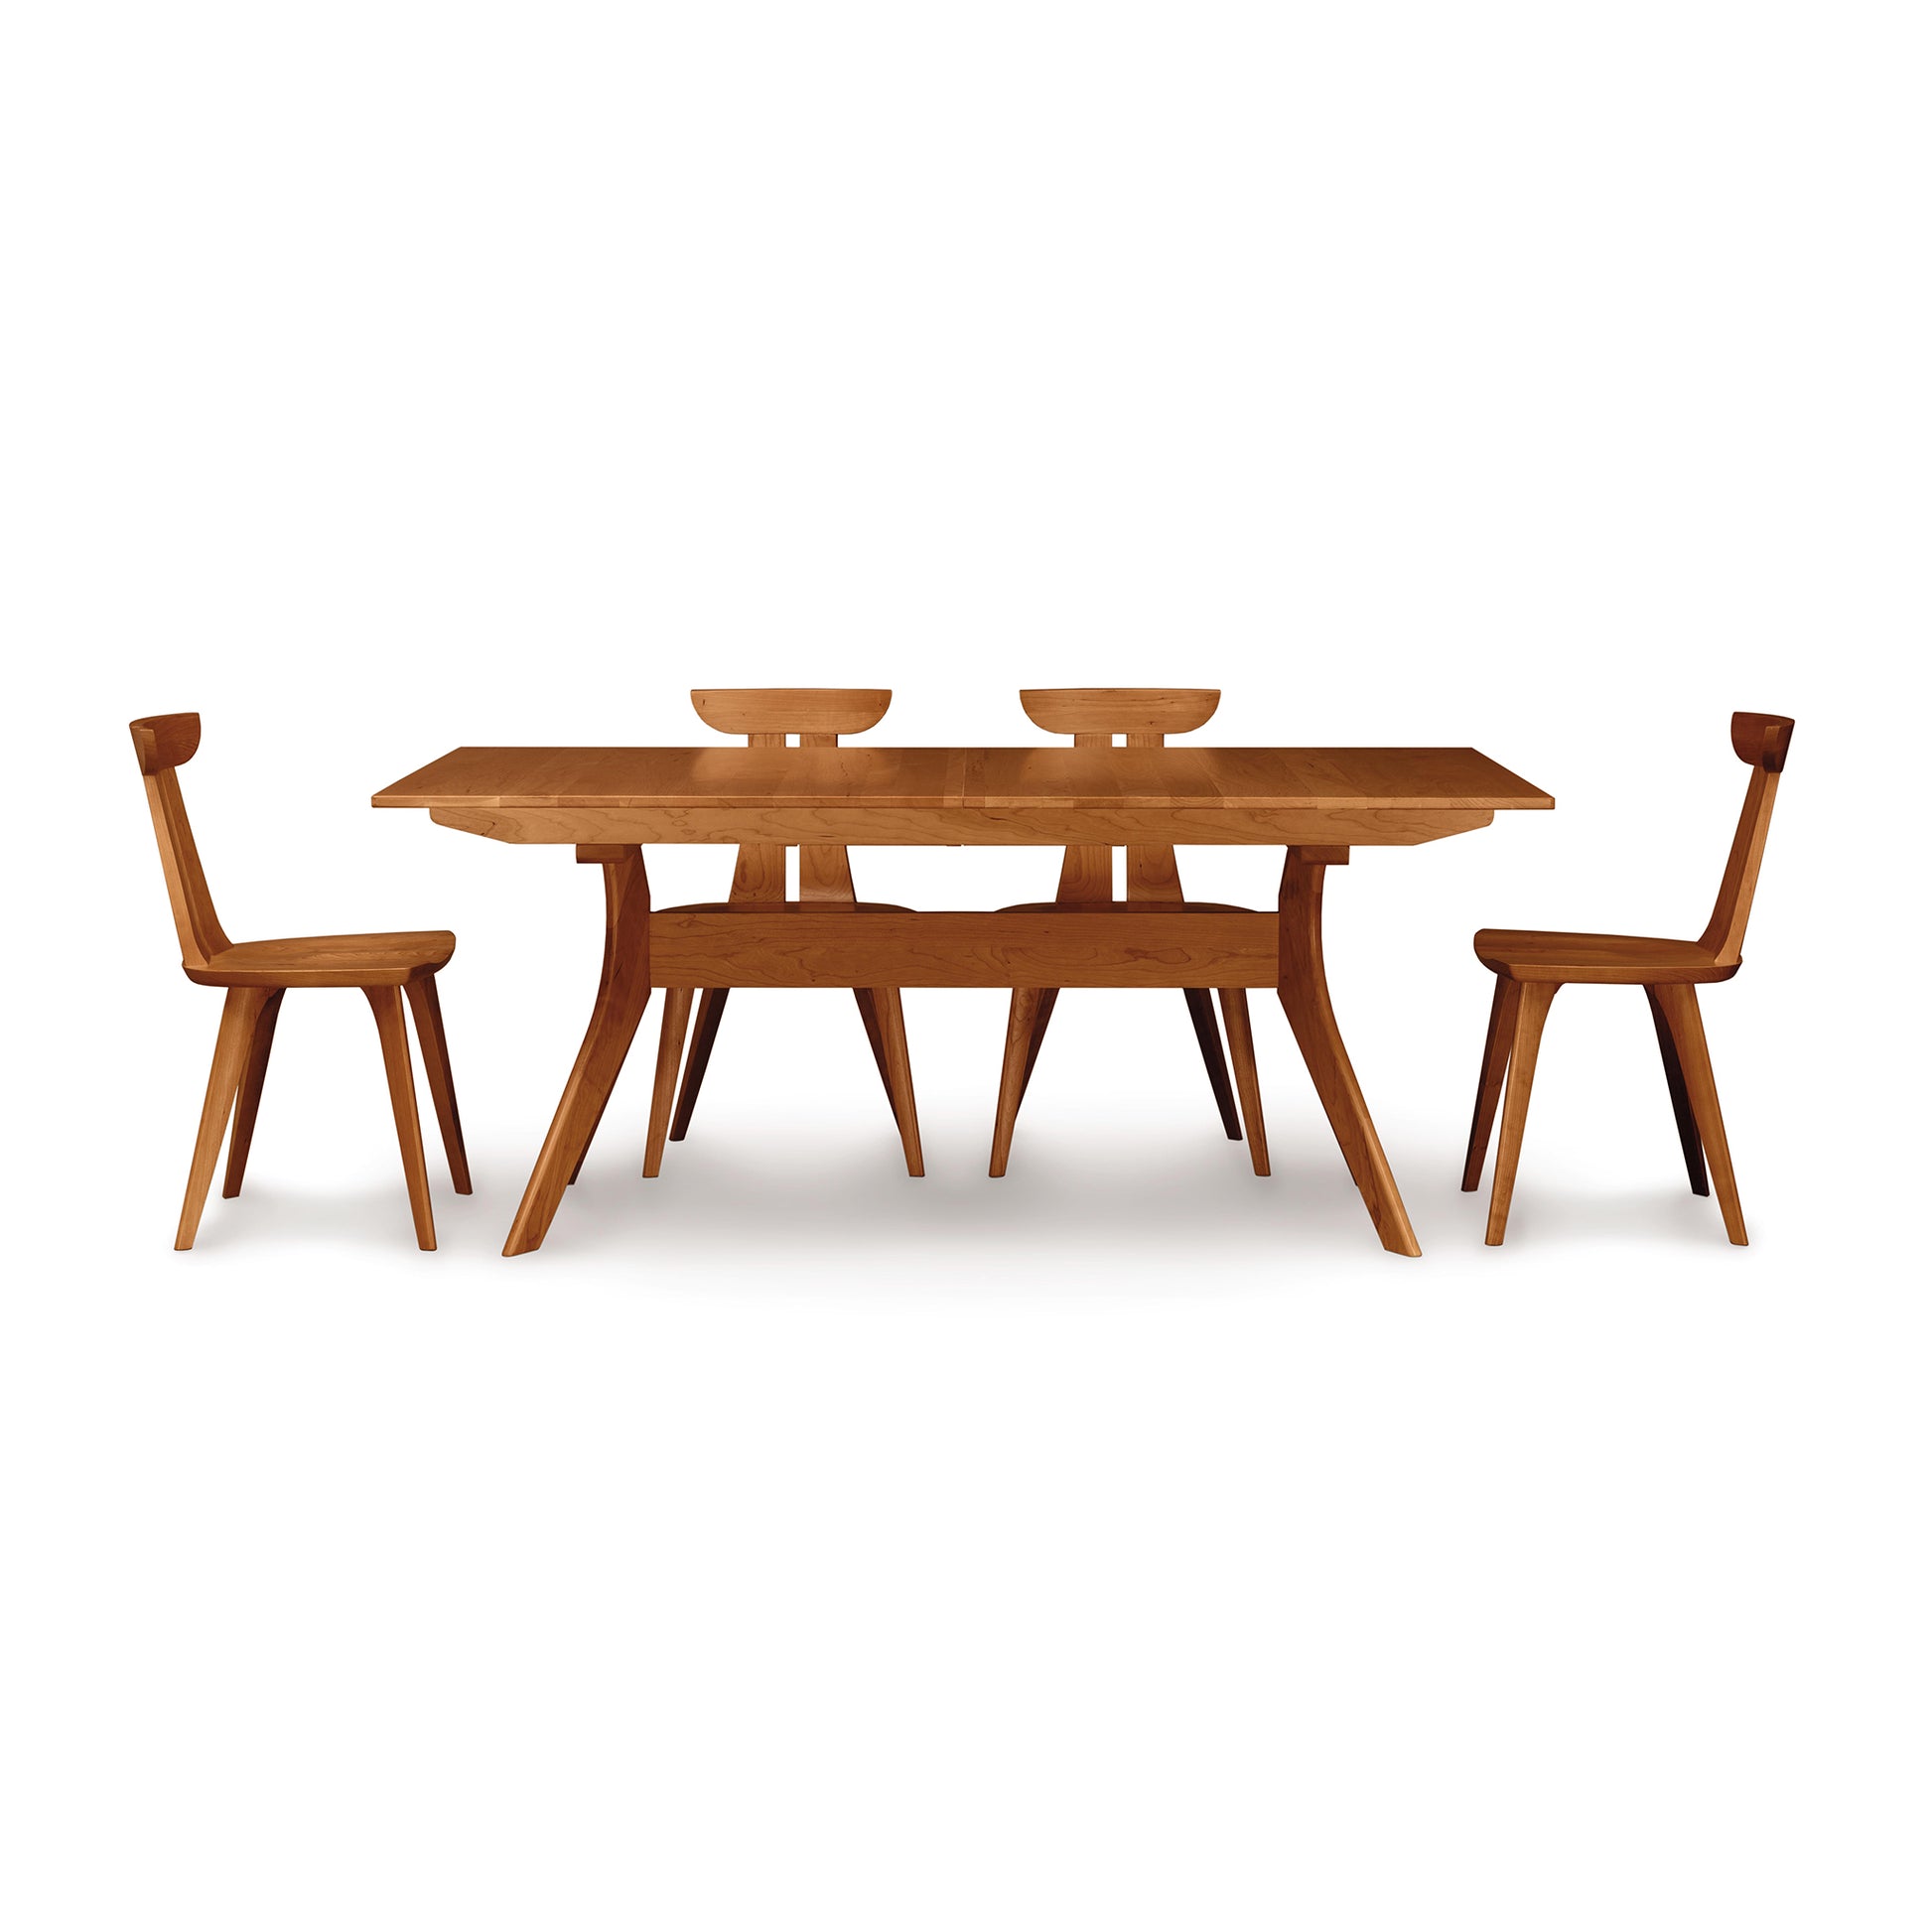 Solid Cherry wood Audrey Extension dining table set with four chairs by Copeland Furniture on a white background.